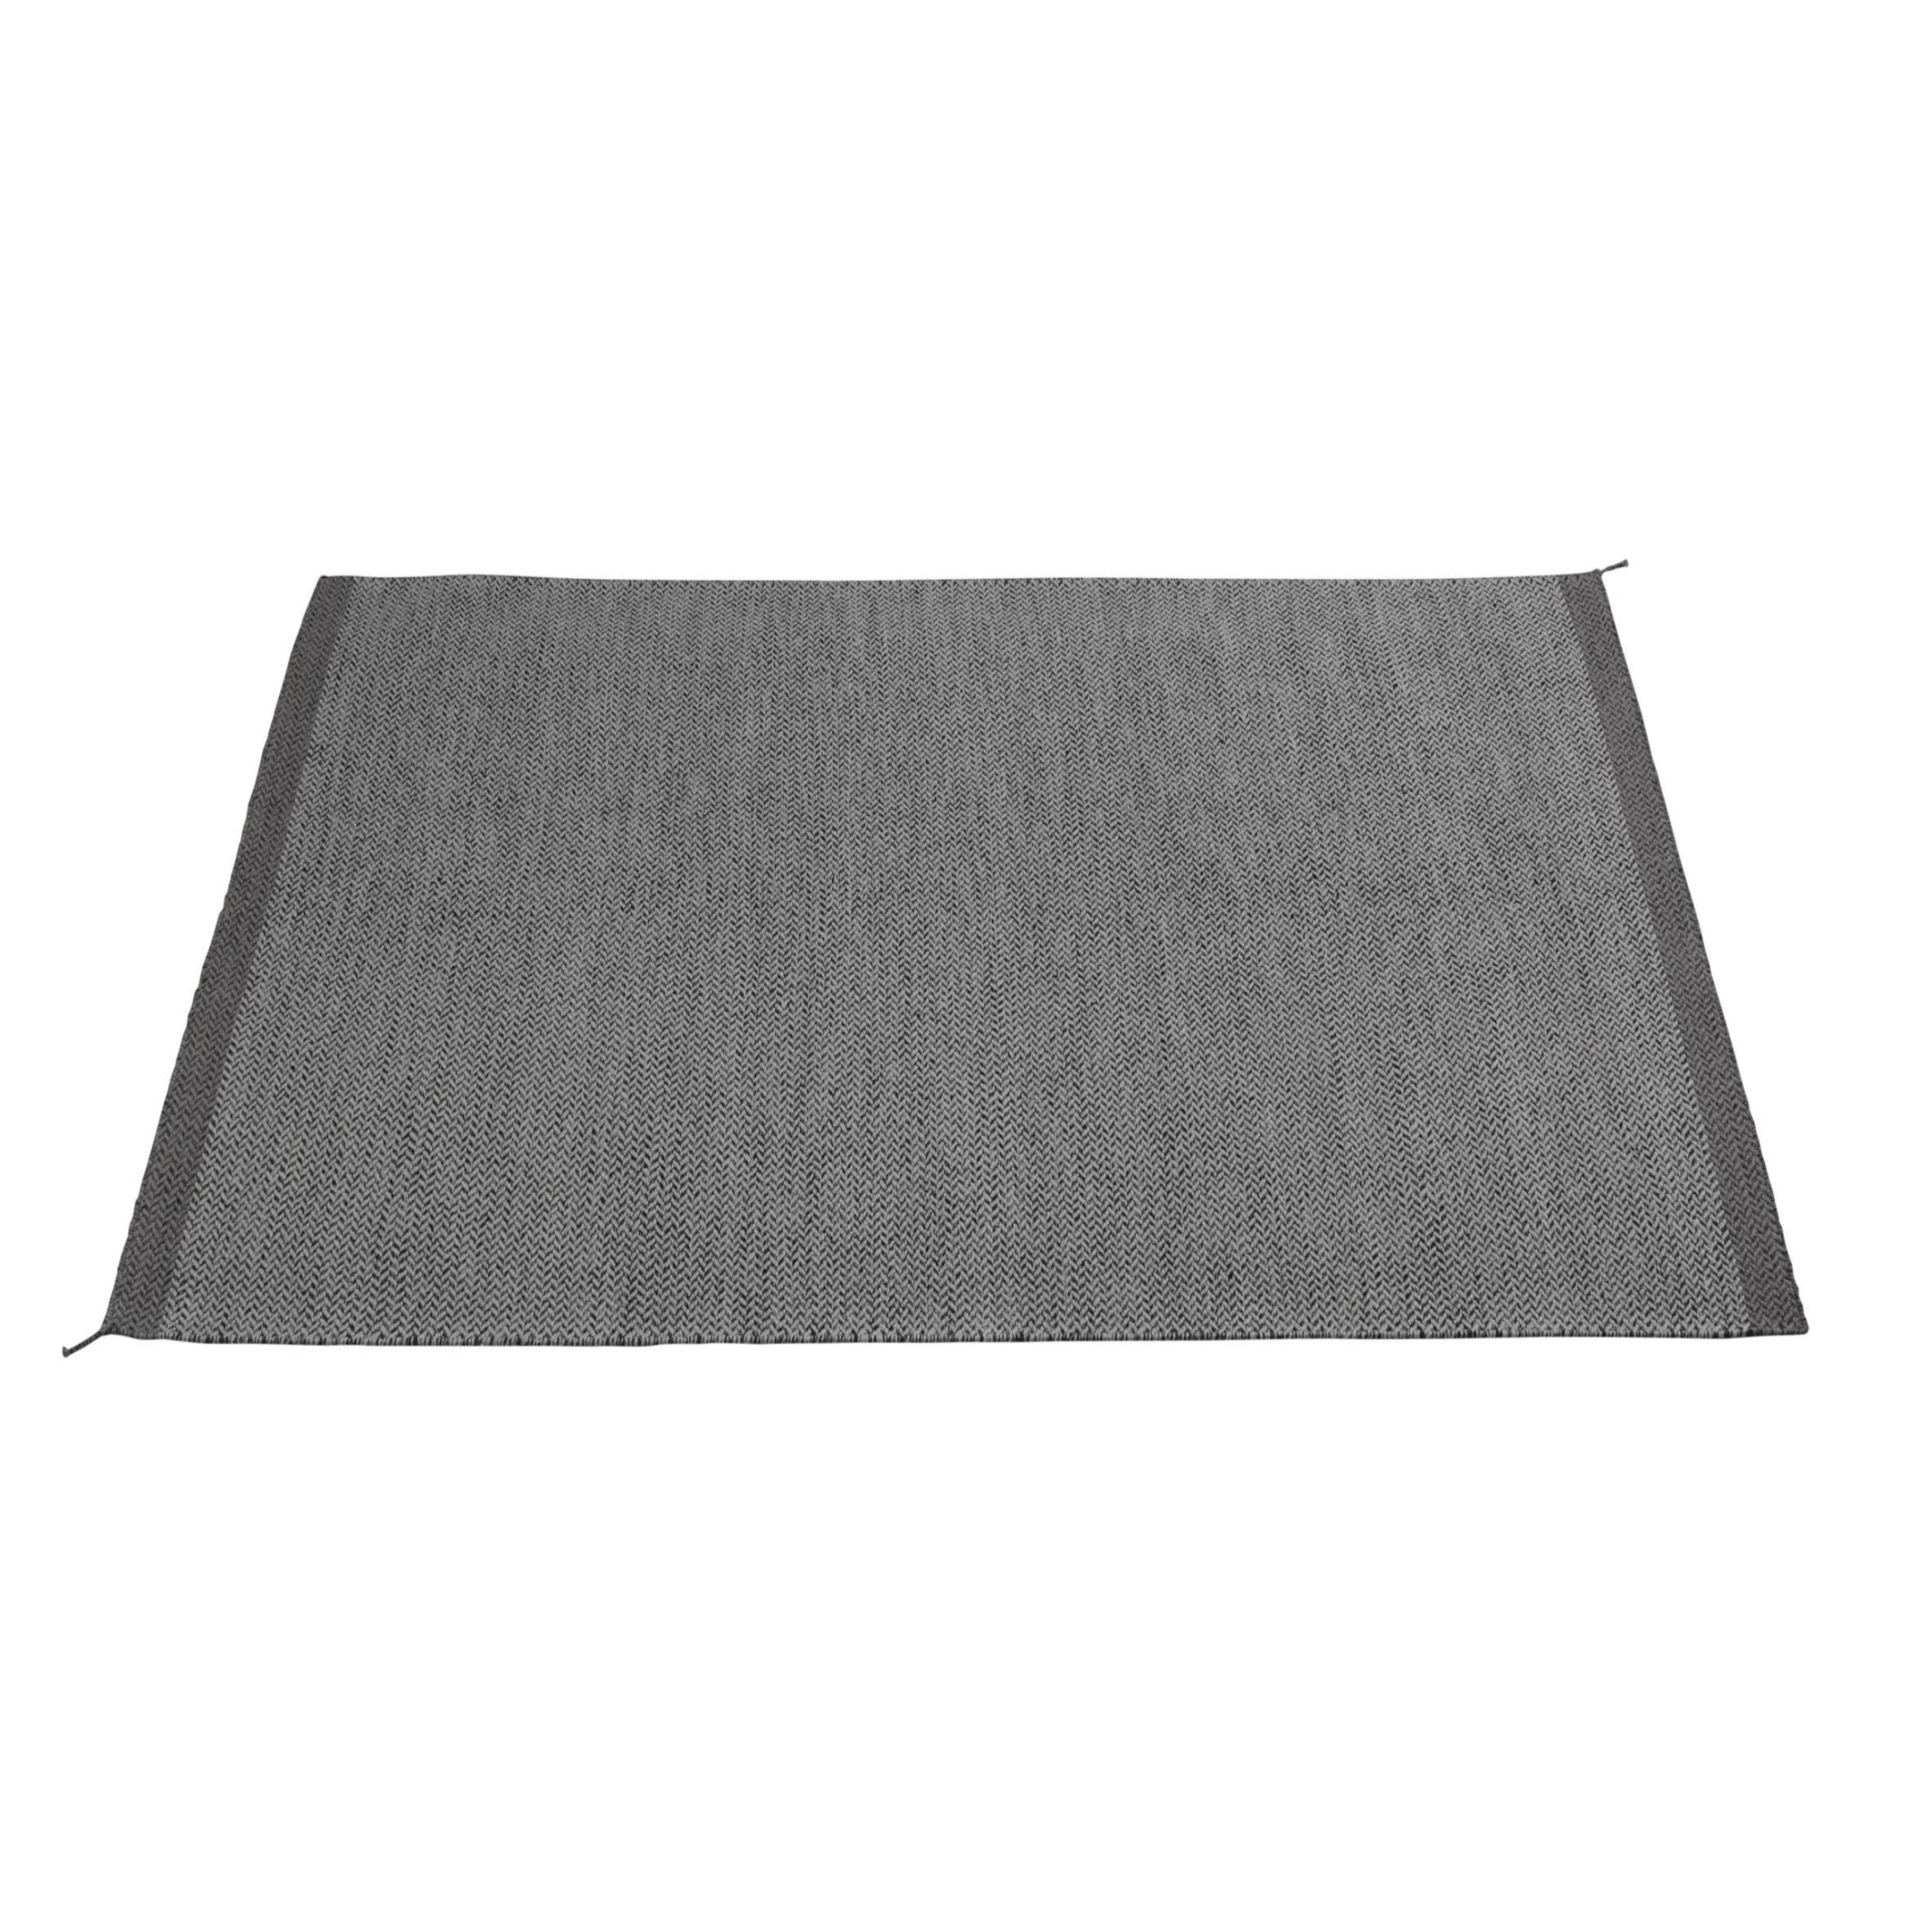 Ply Rug: XX Large - 157.5